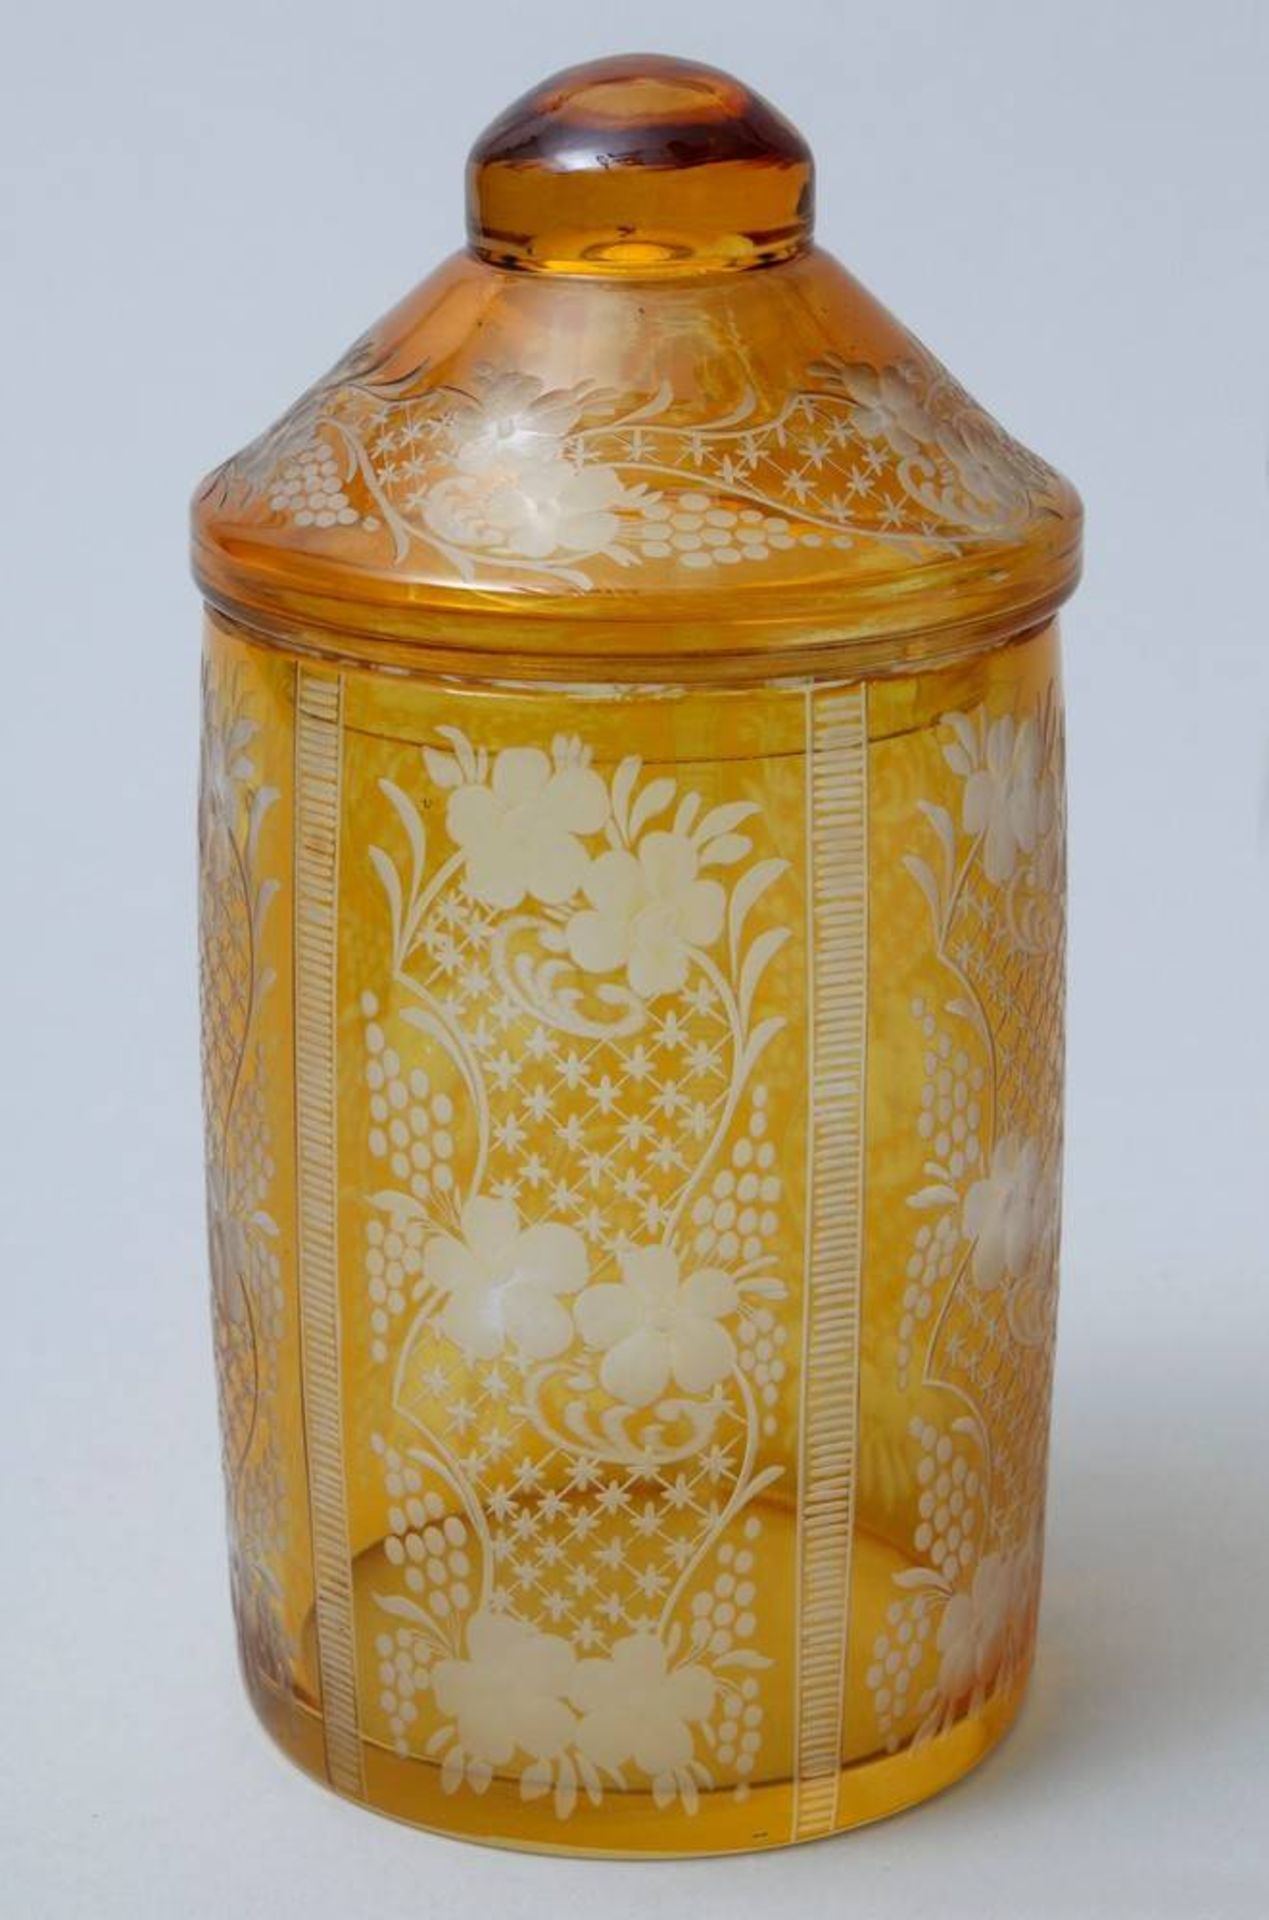 Lidded jar poss. Bohemia, ca. 1900/20, floral decoration, amber coloured glass, H:17,5cm, signs of